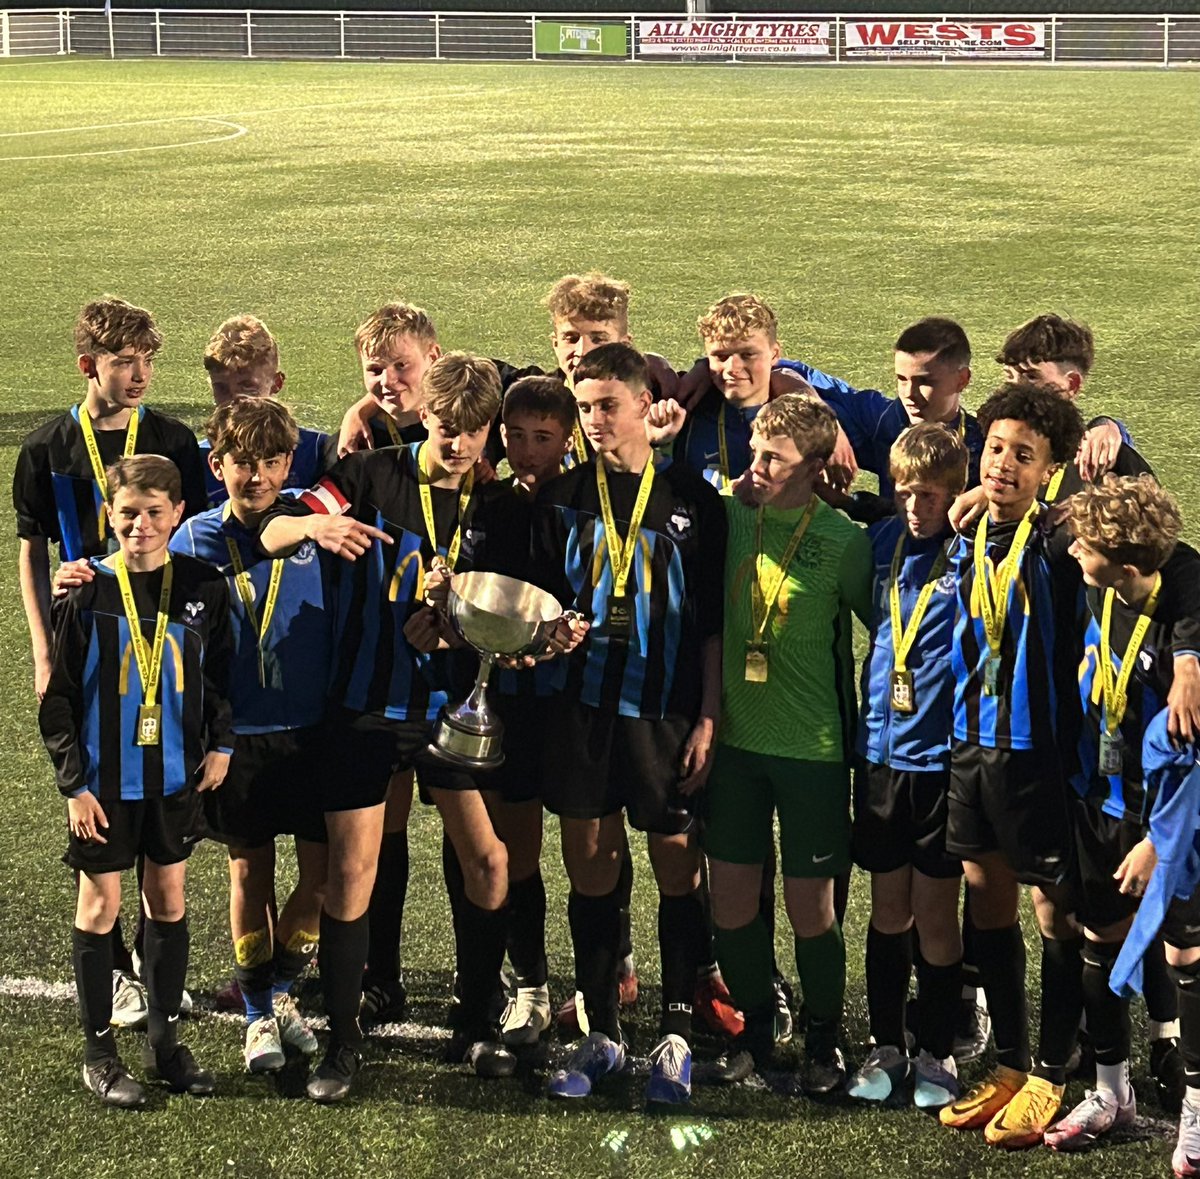 Well done to the U14 Leigh Ramblers EJA side winning the Plate Cup Final tonight and to our own Hayden playing up with them as well . Great performance from all the boys ! 
#Rams